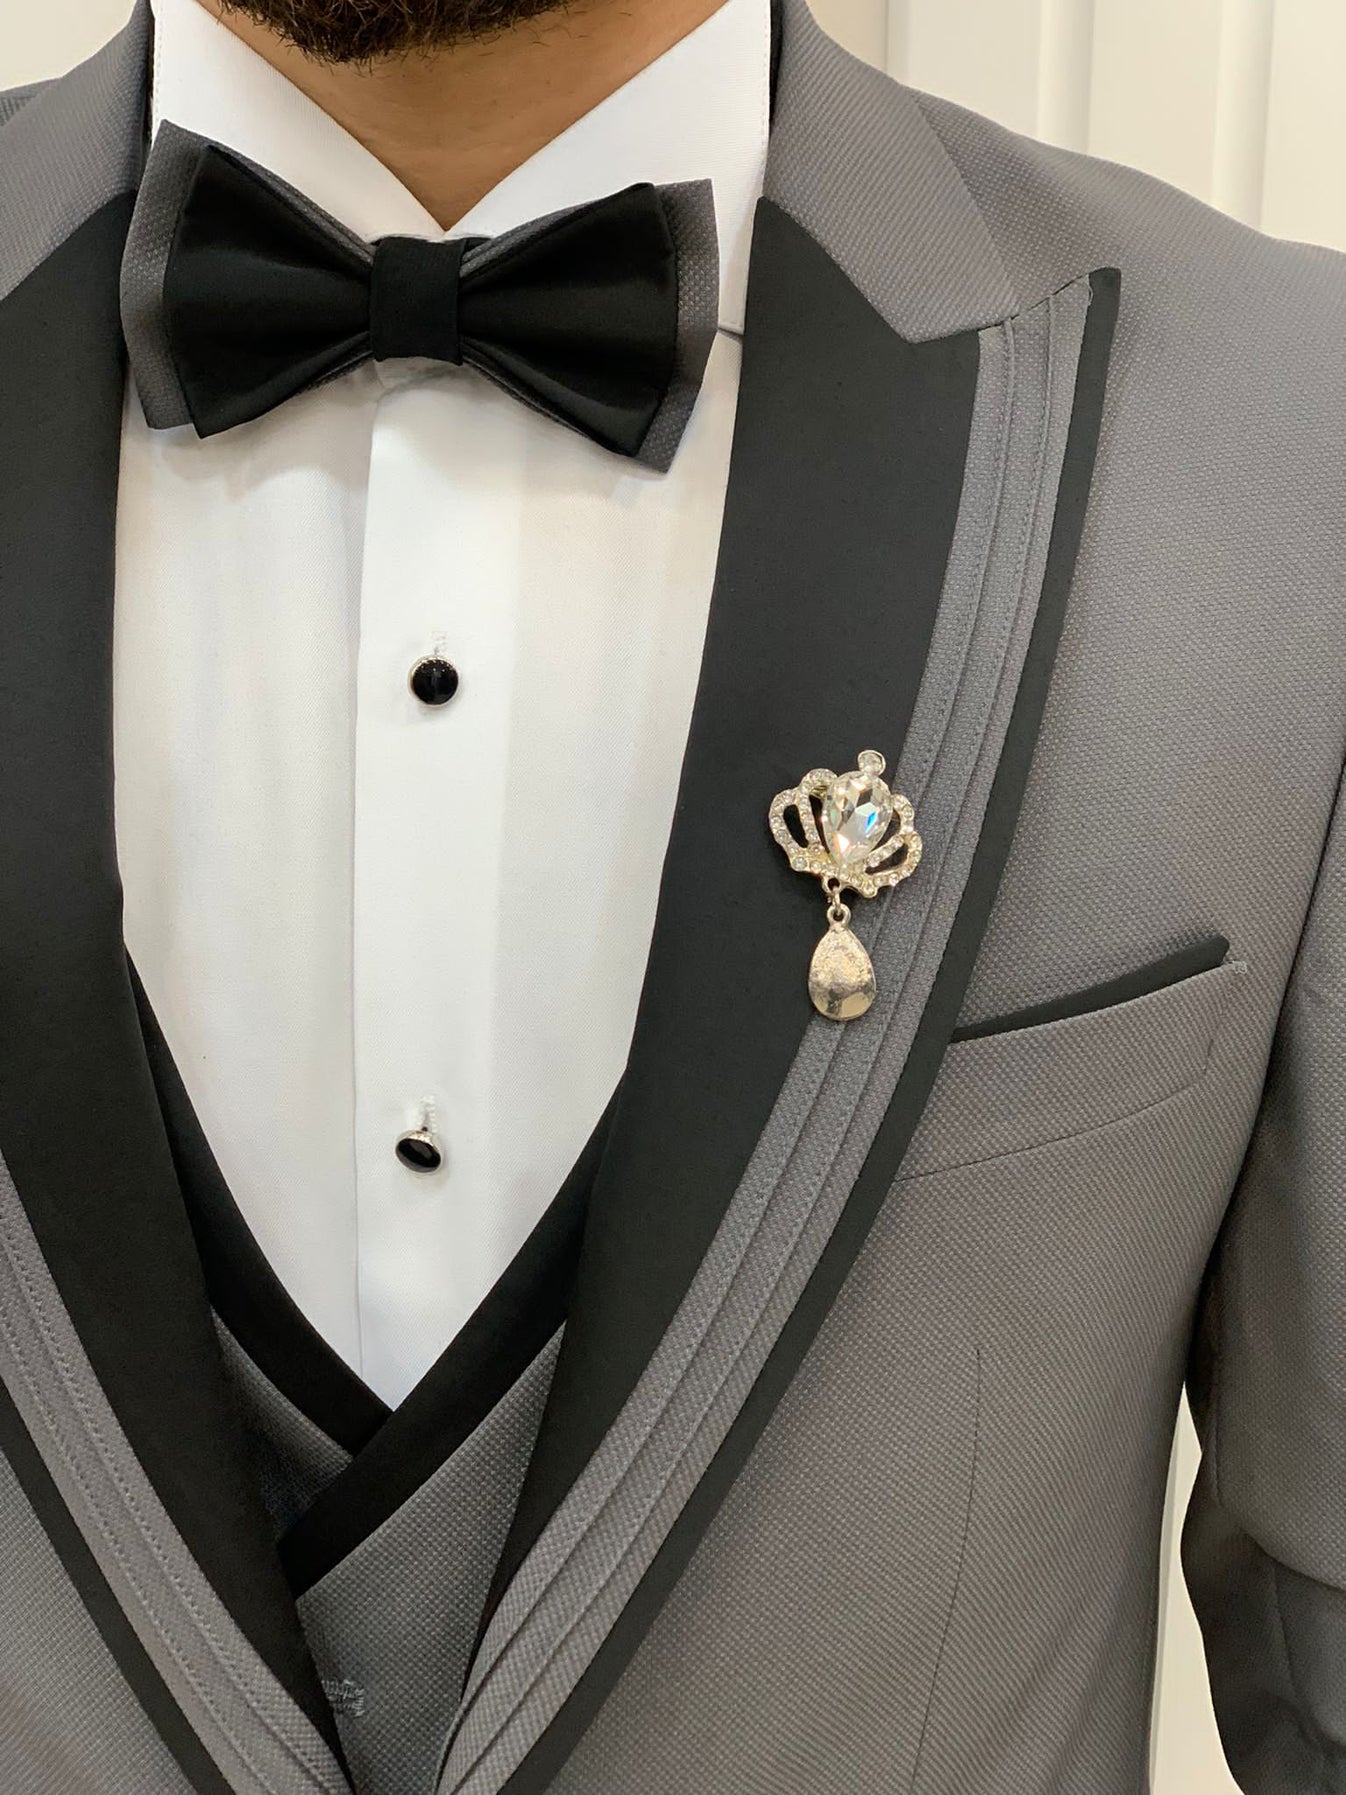 Upgrade Your Formal Look with our Gray Tuxedo - Peak Lapel, Slim-Fit ...